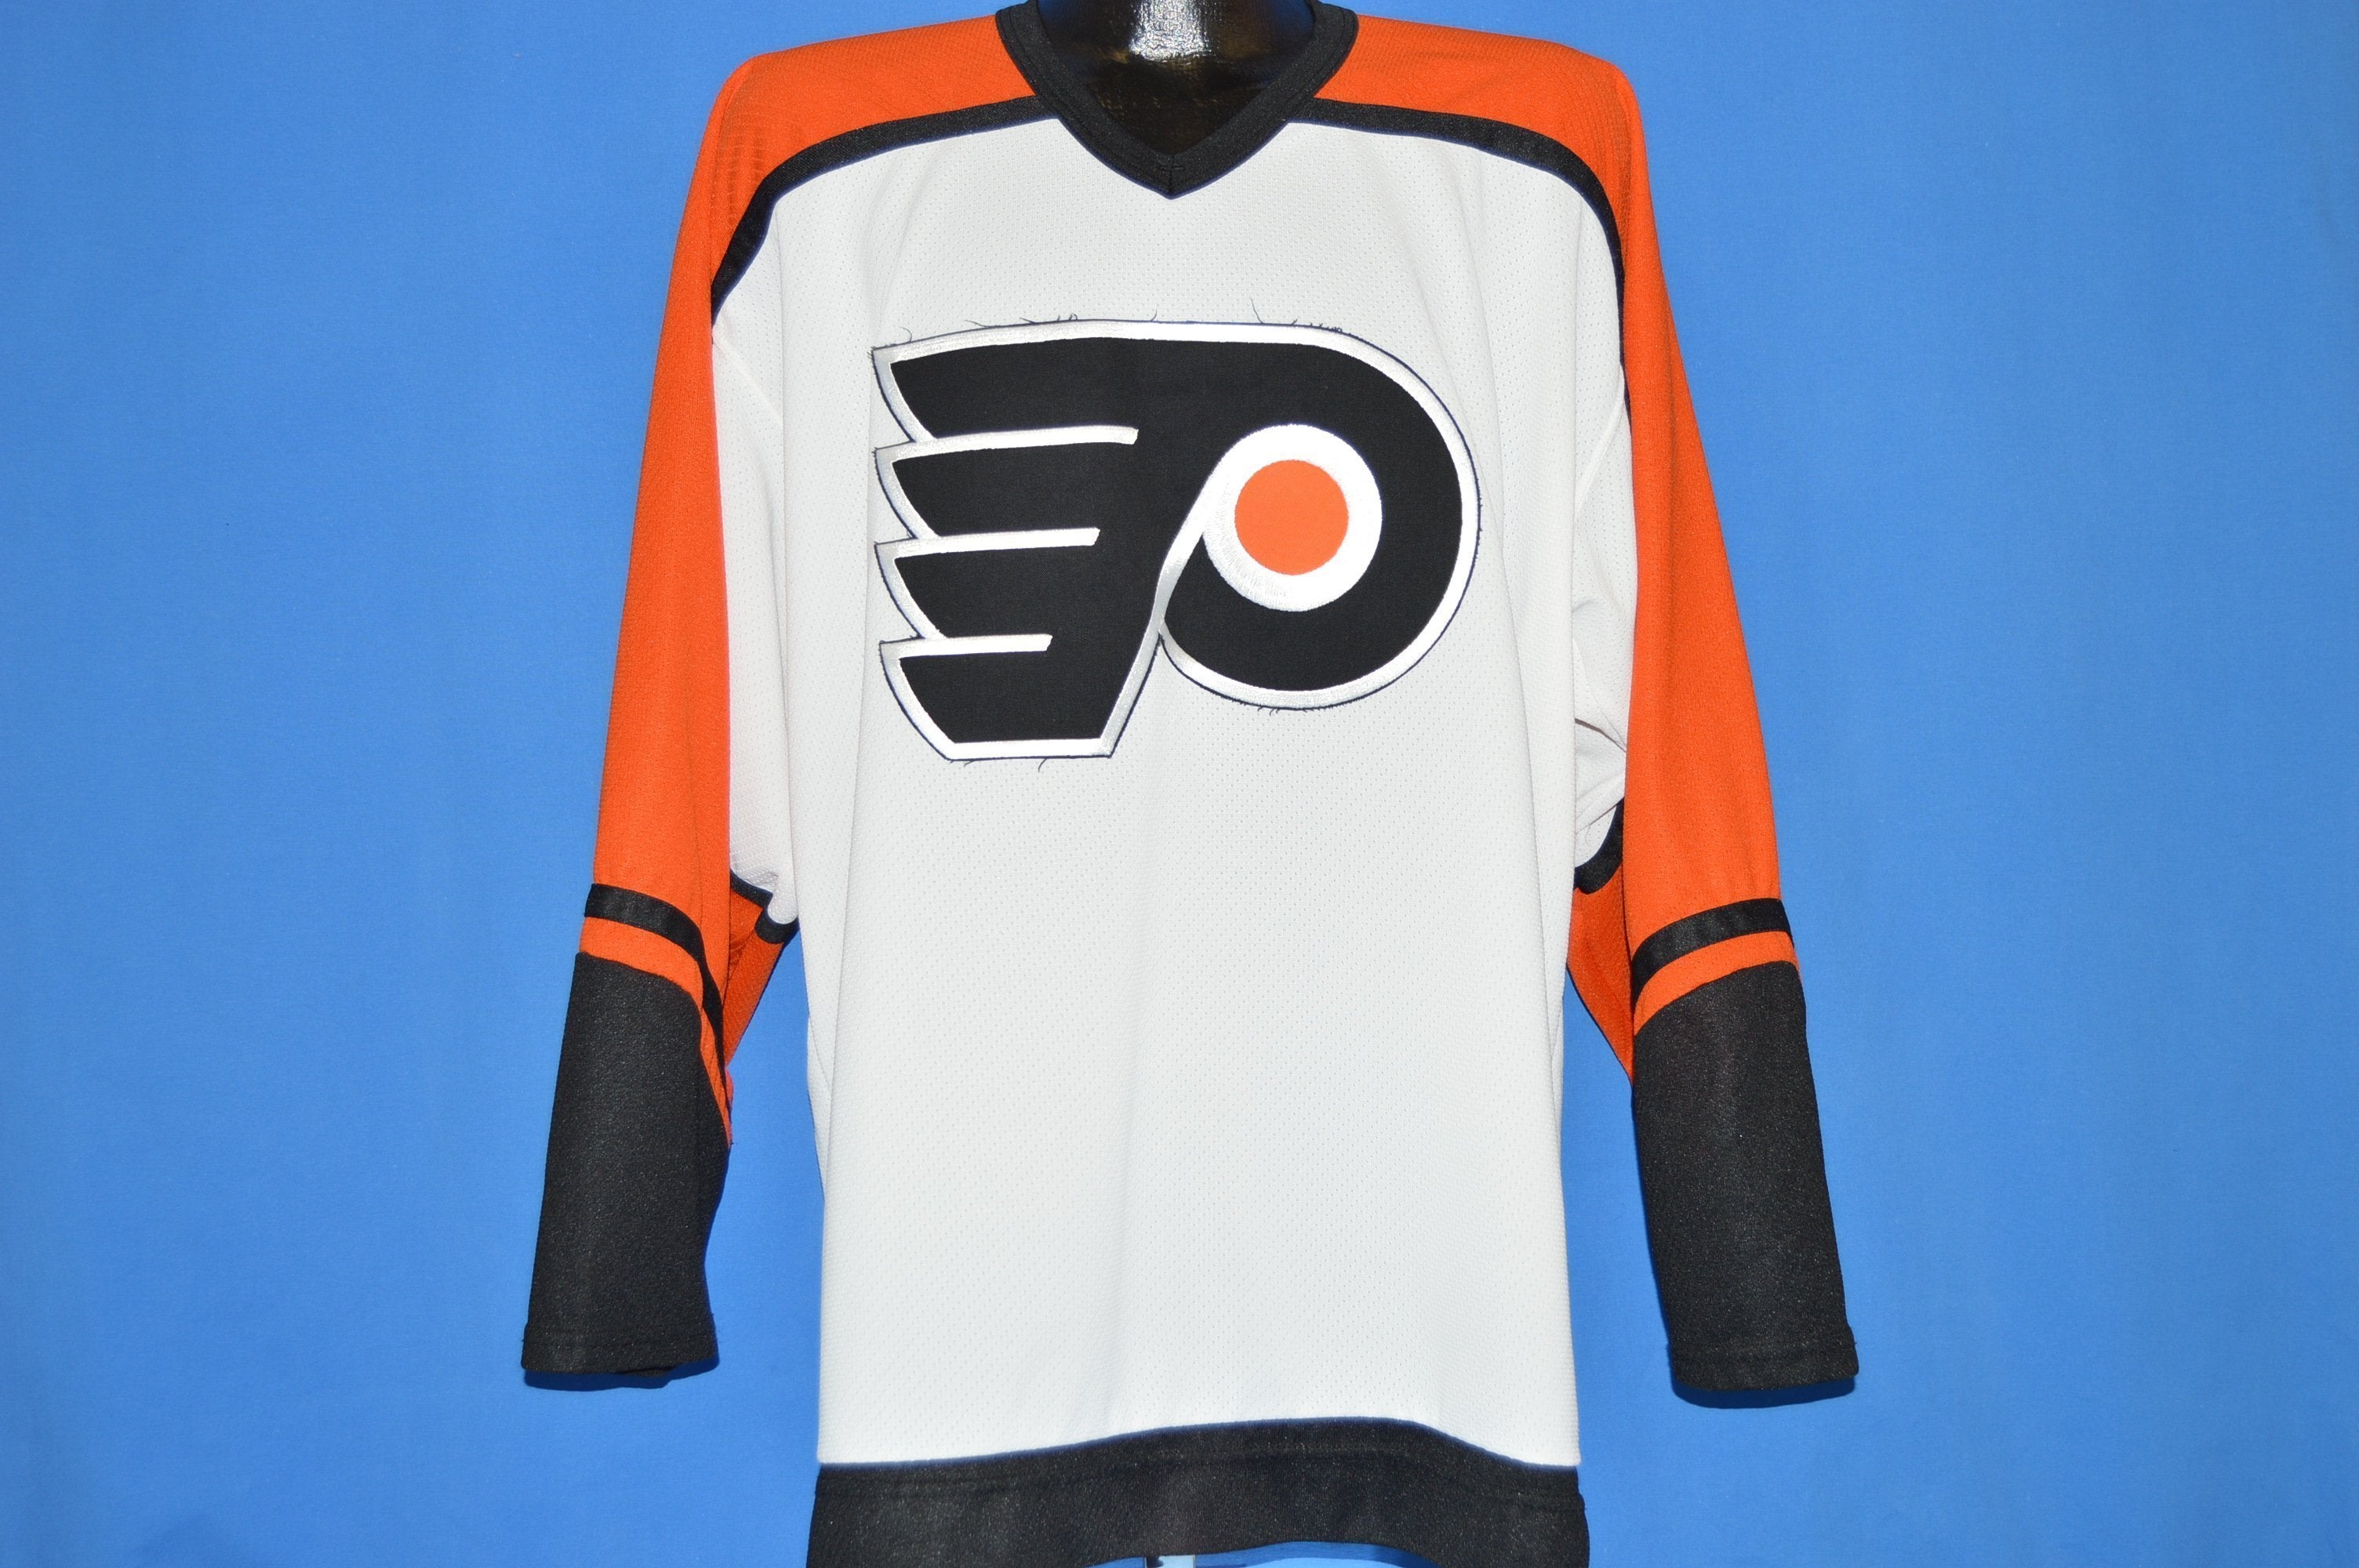 Adult Jersey CCM - White